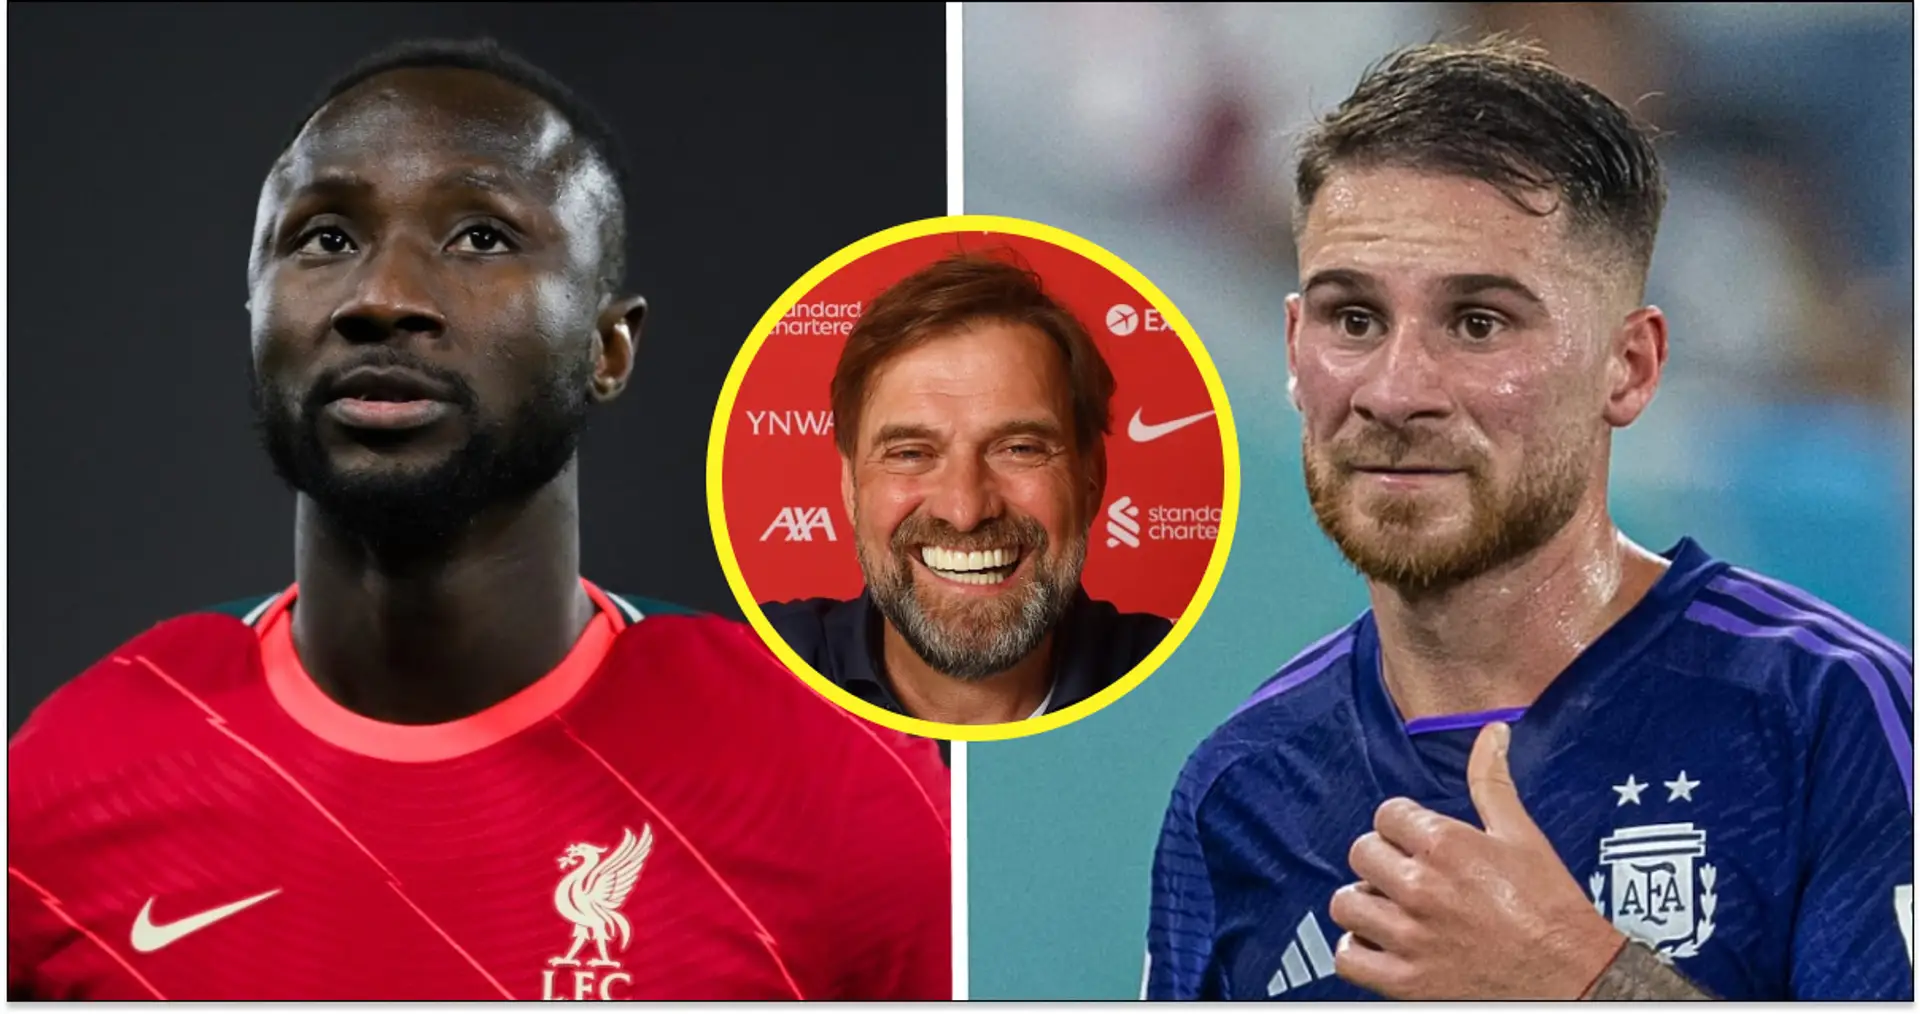 One thing Liverpool fans will love about Mac Allister after what Naby Keita did to us